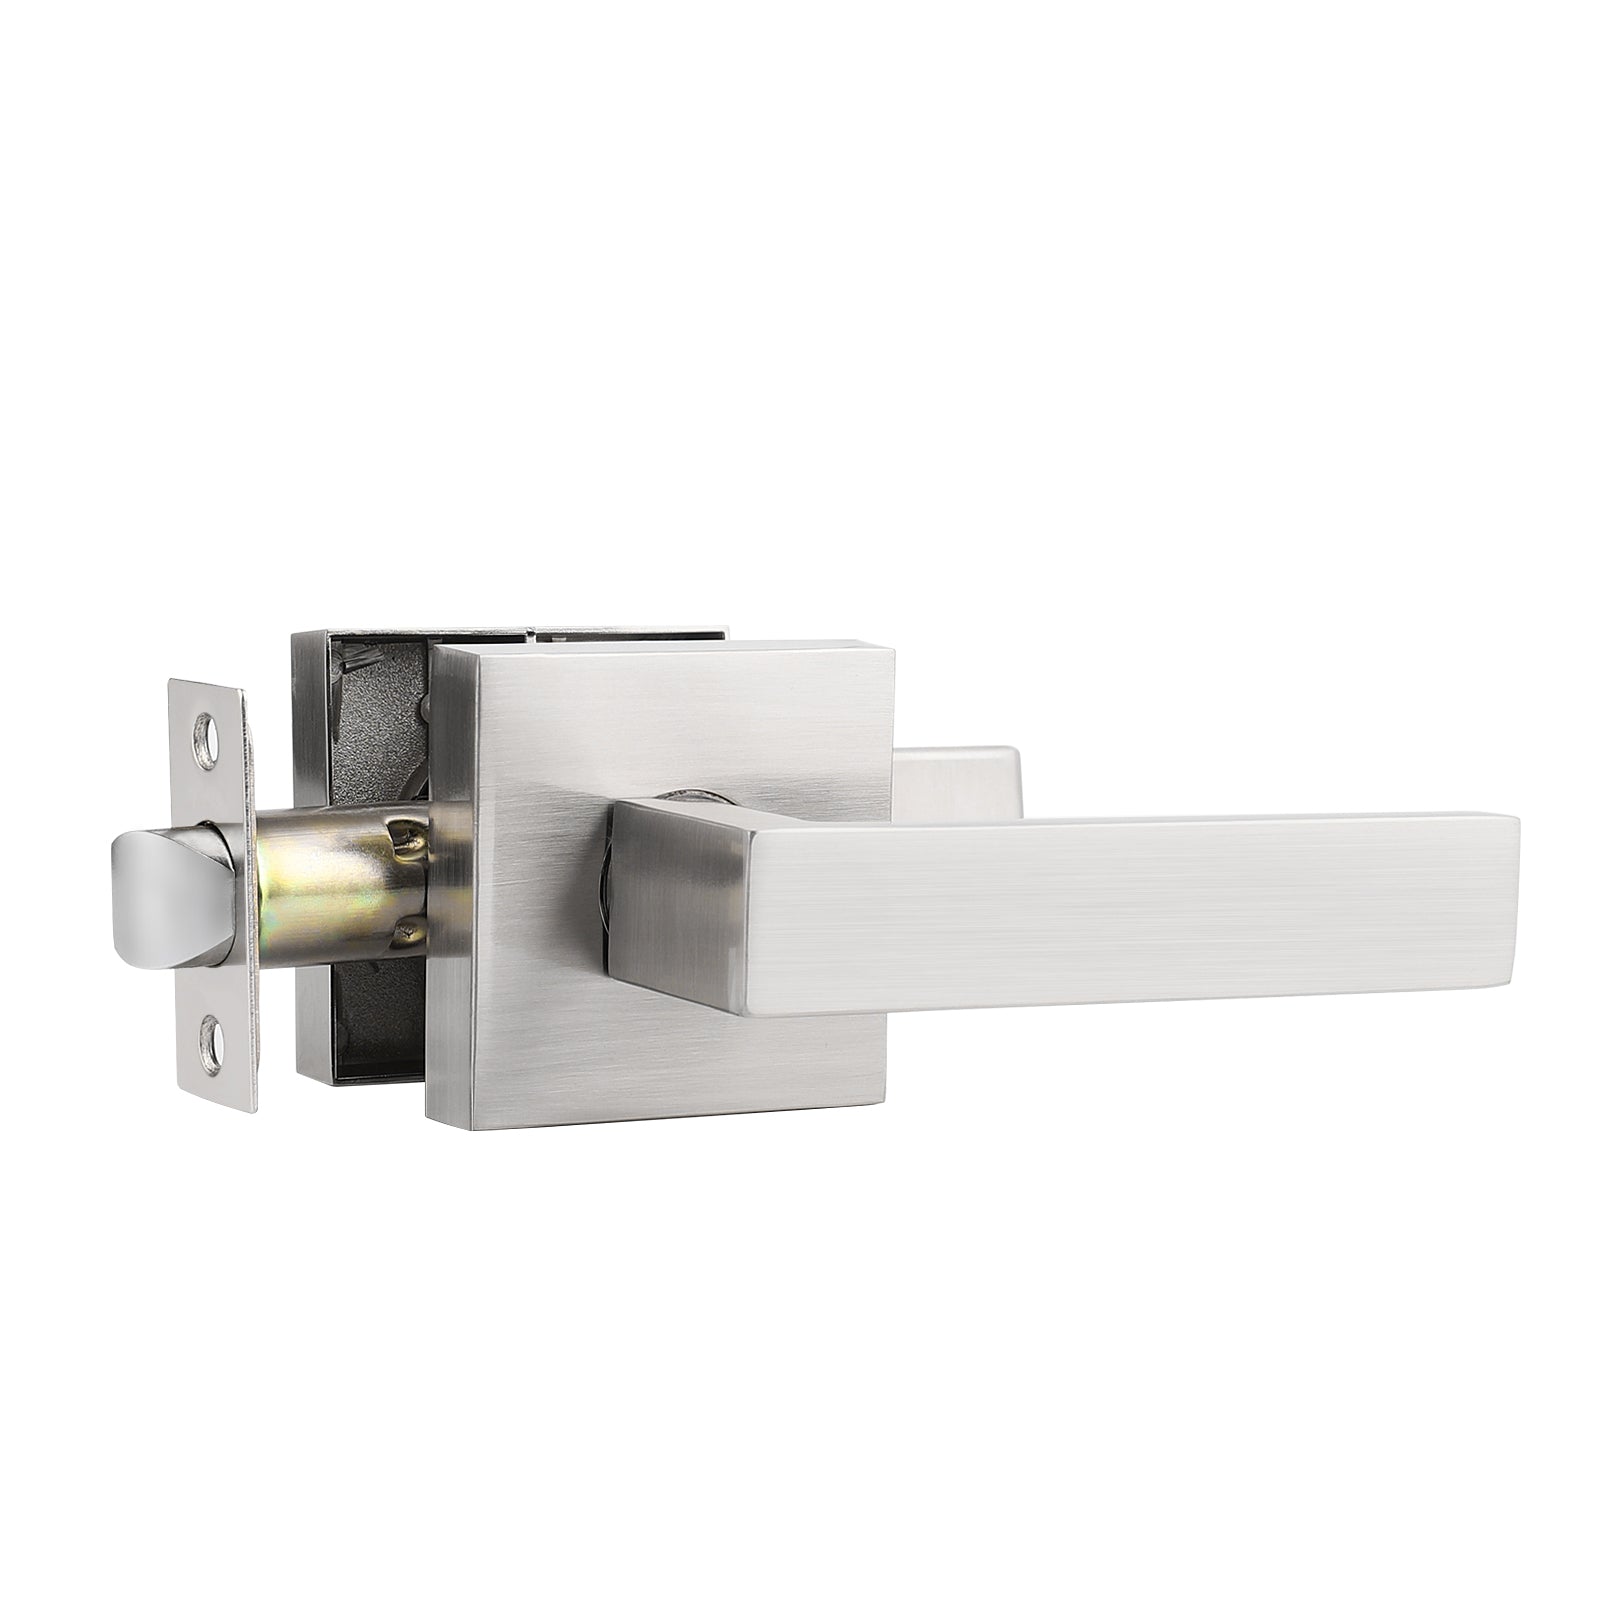 Front Door Levers and Double Cylinder Deadbolts Lock Set (Keyed Alike), Satin Nickel Finish